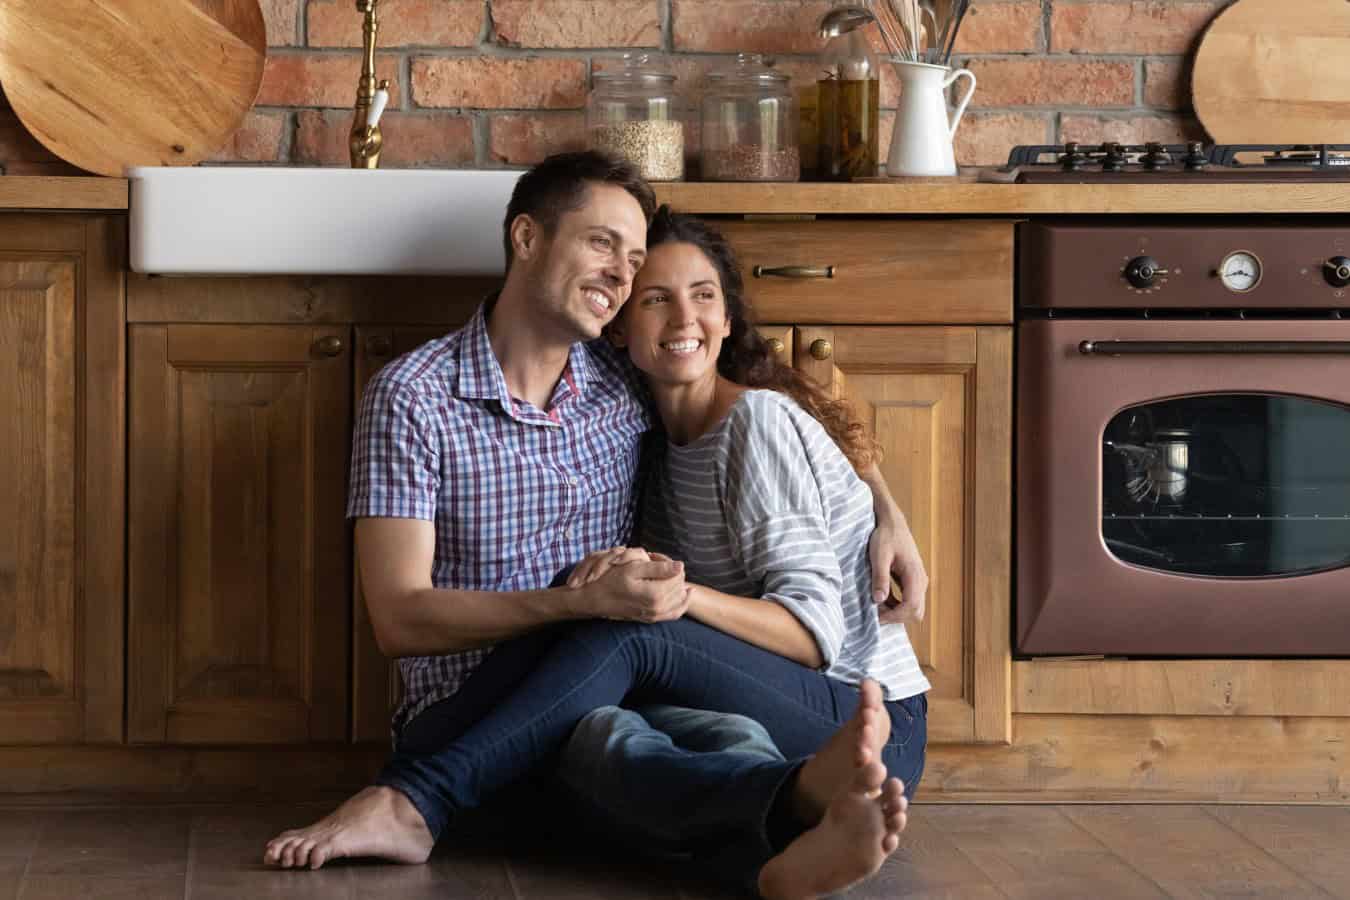 Overjoyed millennial couple renters sit on warm kitchen floor hugging look in distance dreaming happy future together. Smiling young man and woman embrace plan imagine new beginning or perspectives.